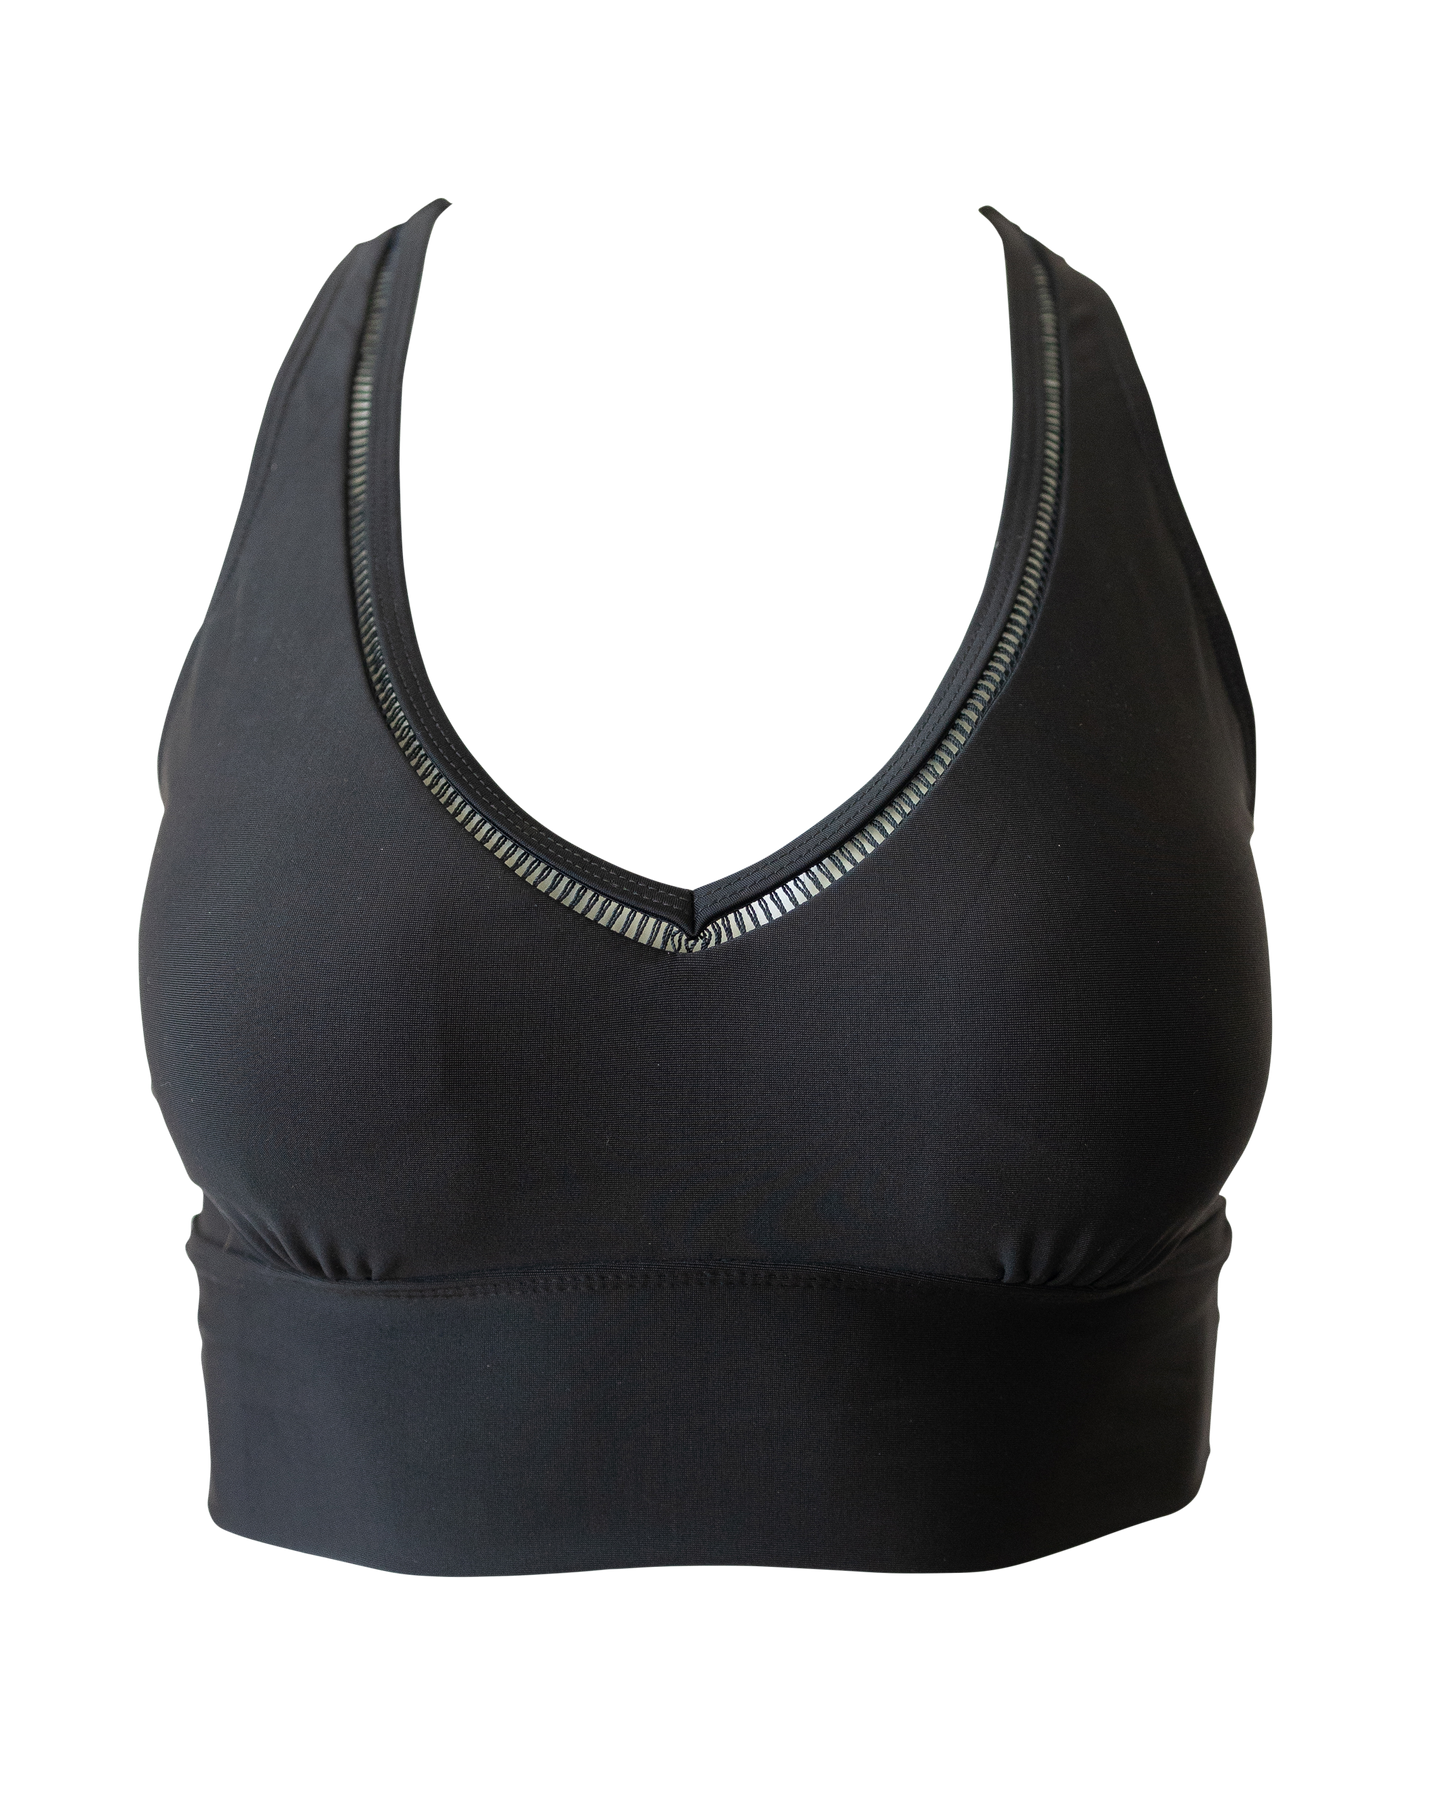 A flat lay image of a black v neck swimsuit top.